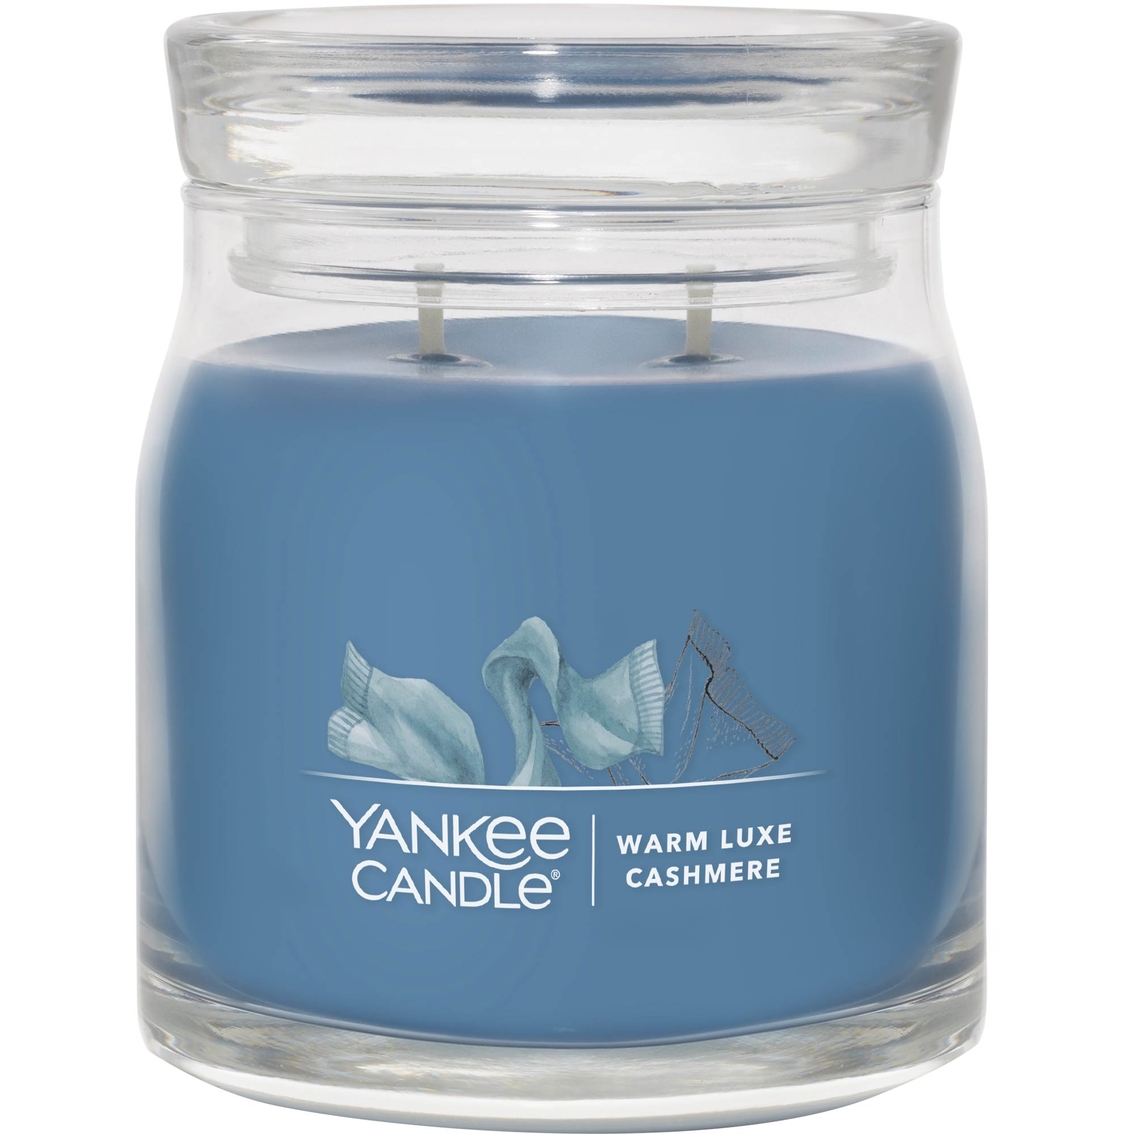 Yankee Candle Warm Luxe Cashmere Signature Medium Jar Candle | Candles ...